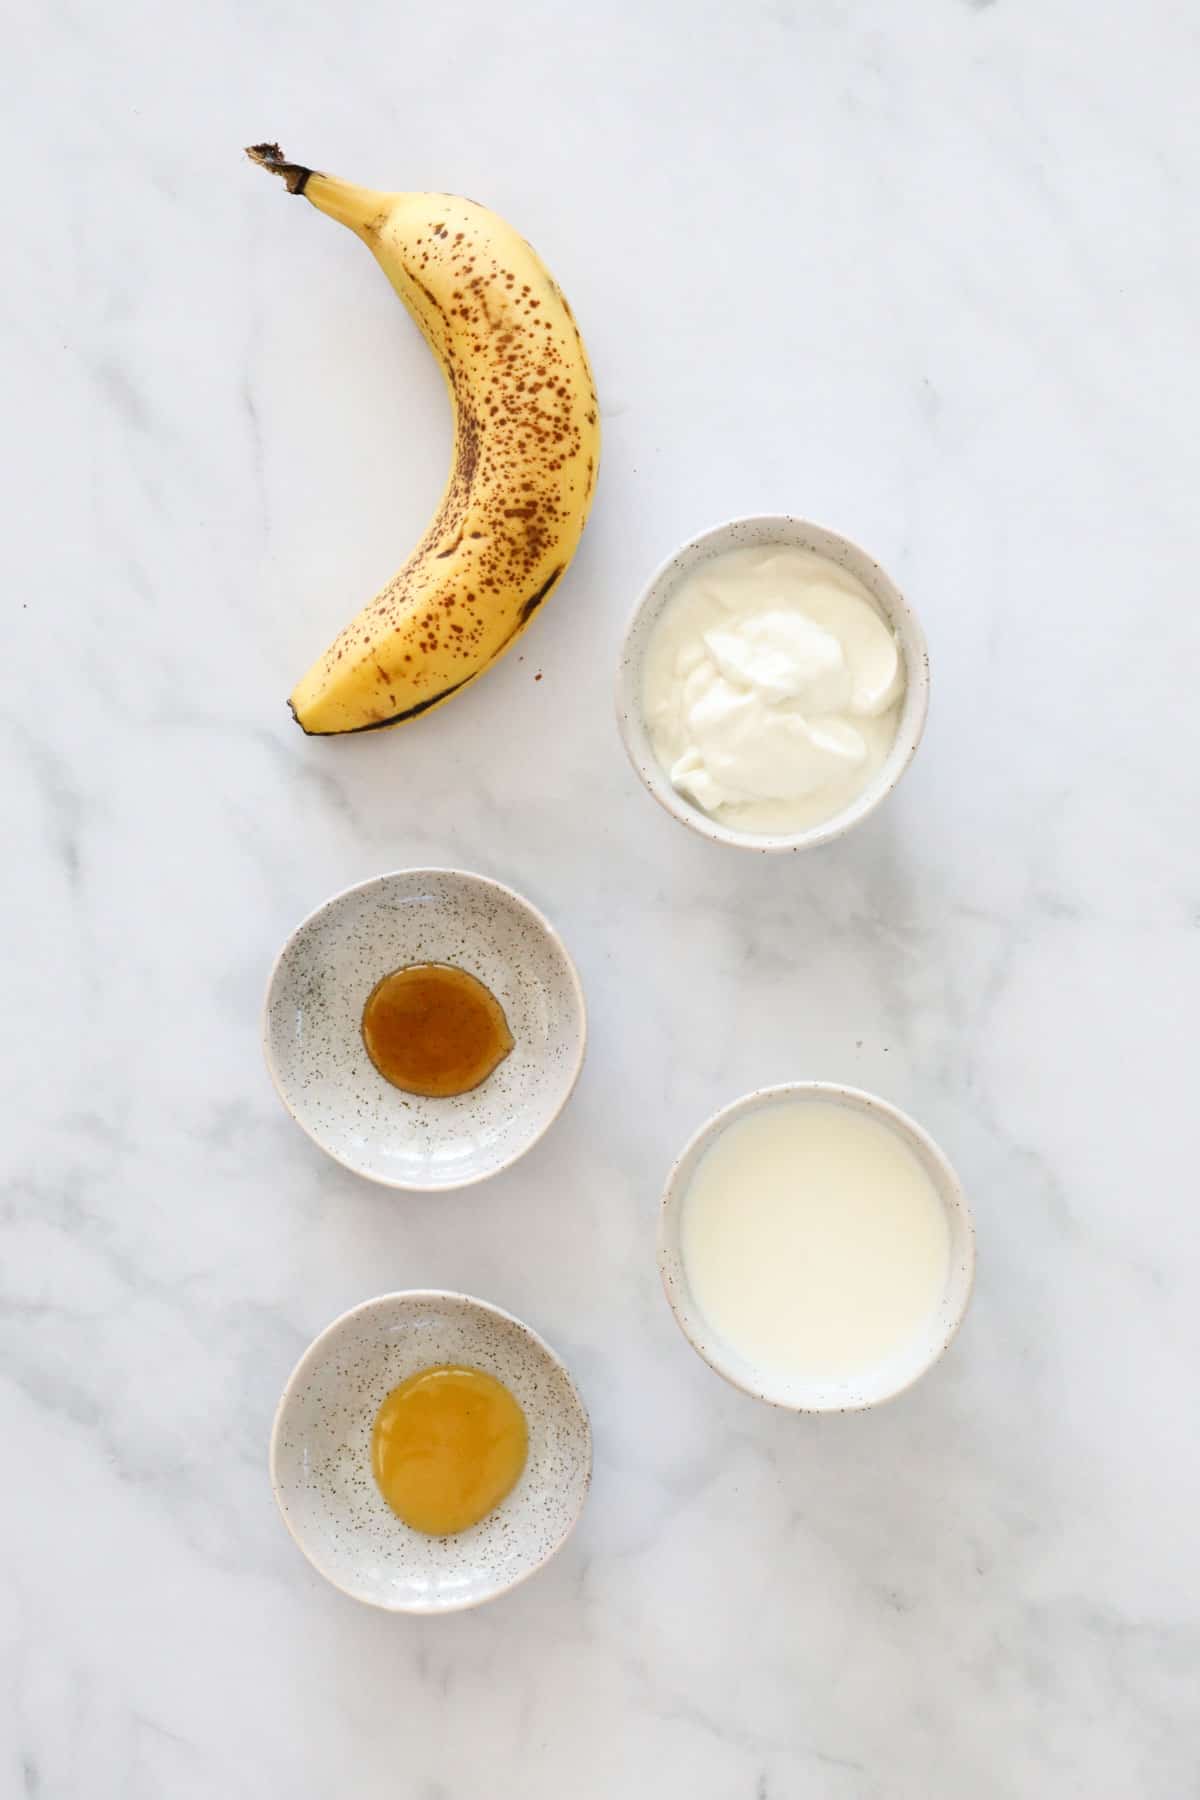 Ingredients for making a banana smoothie.